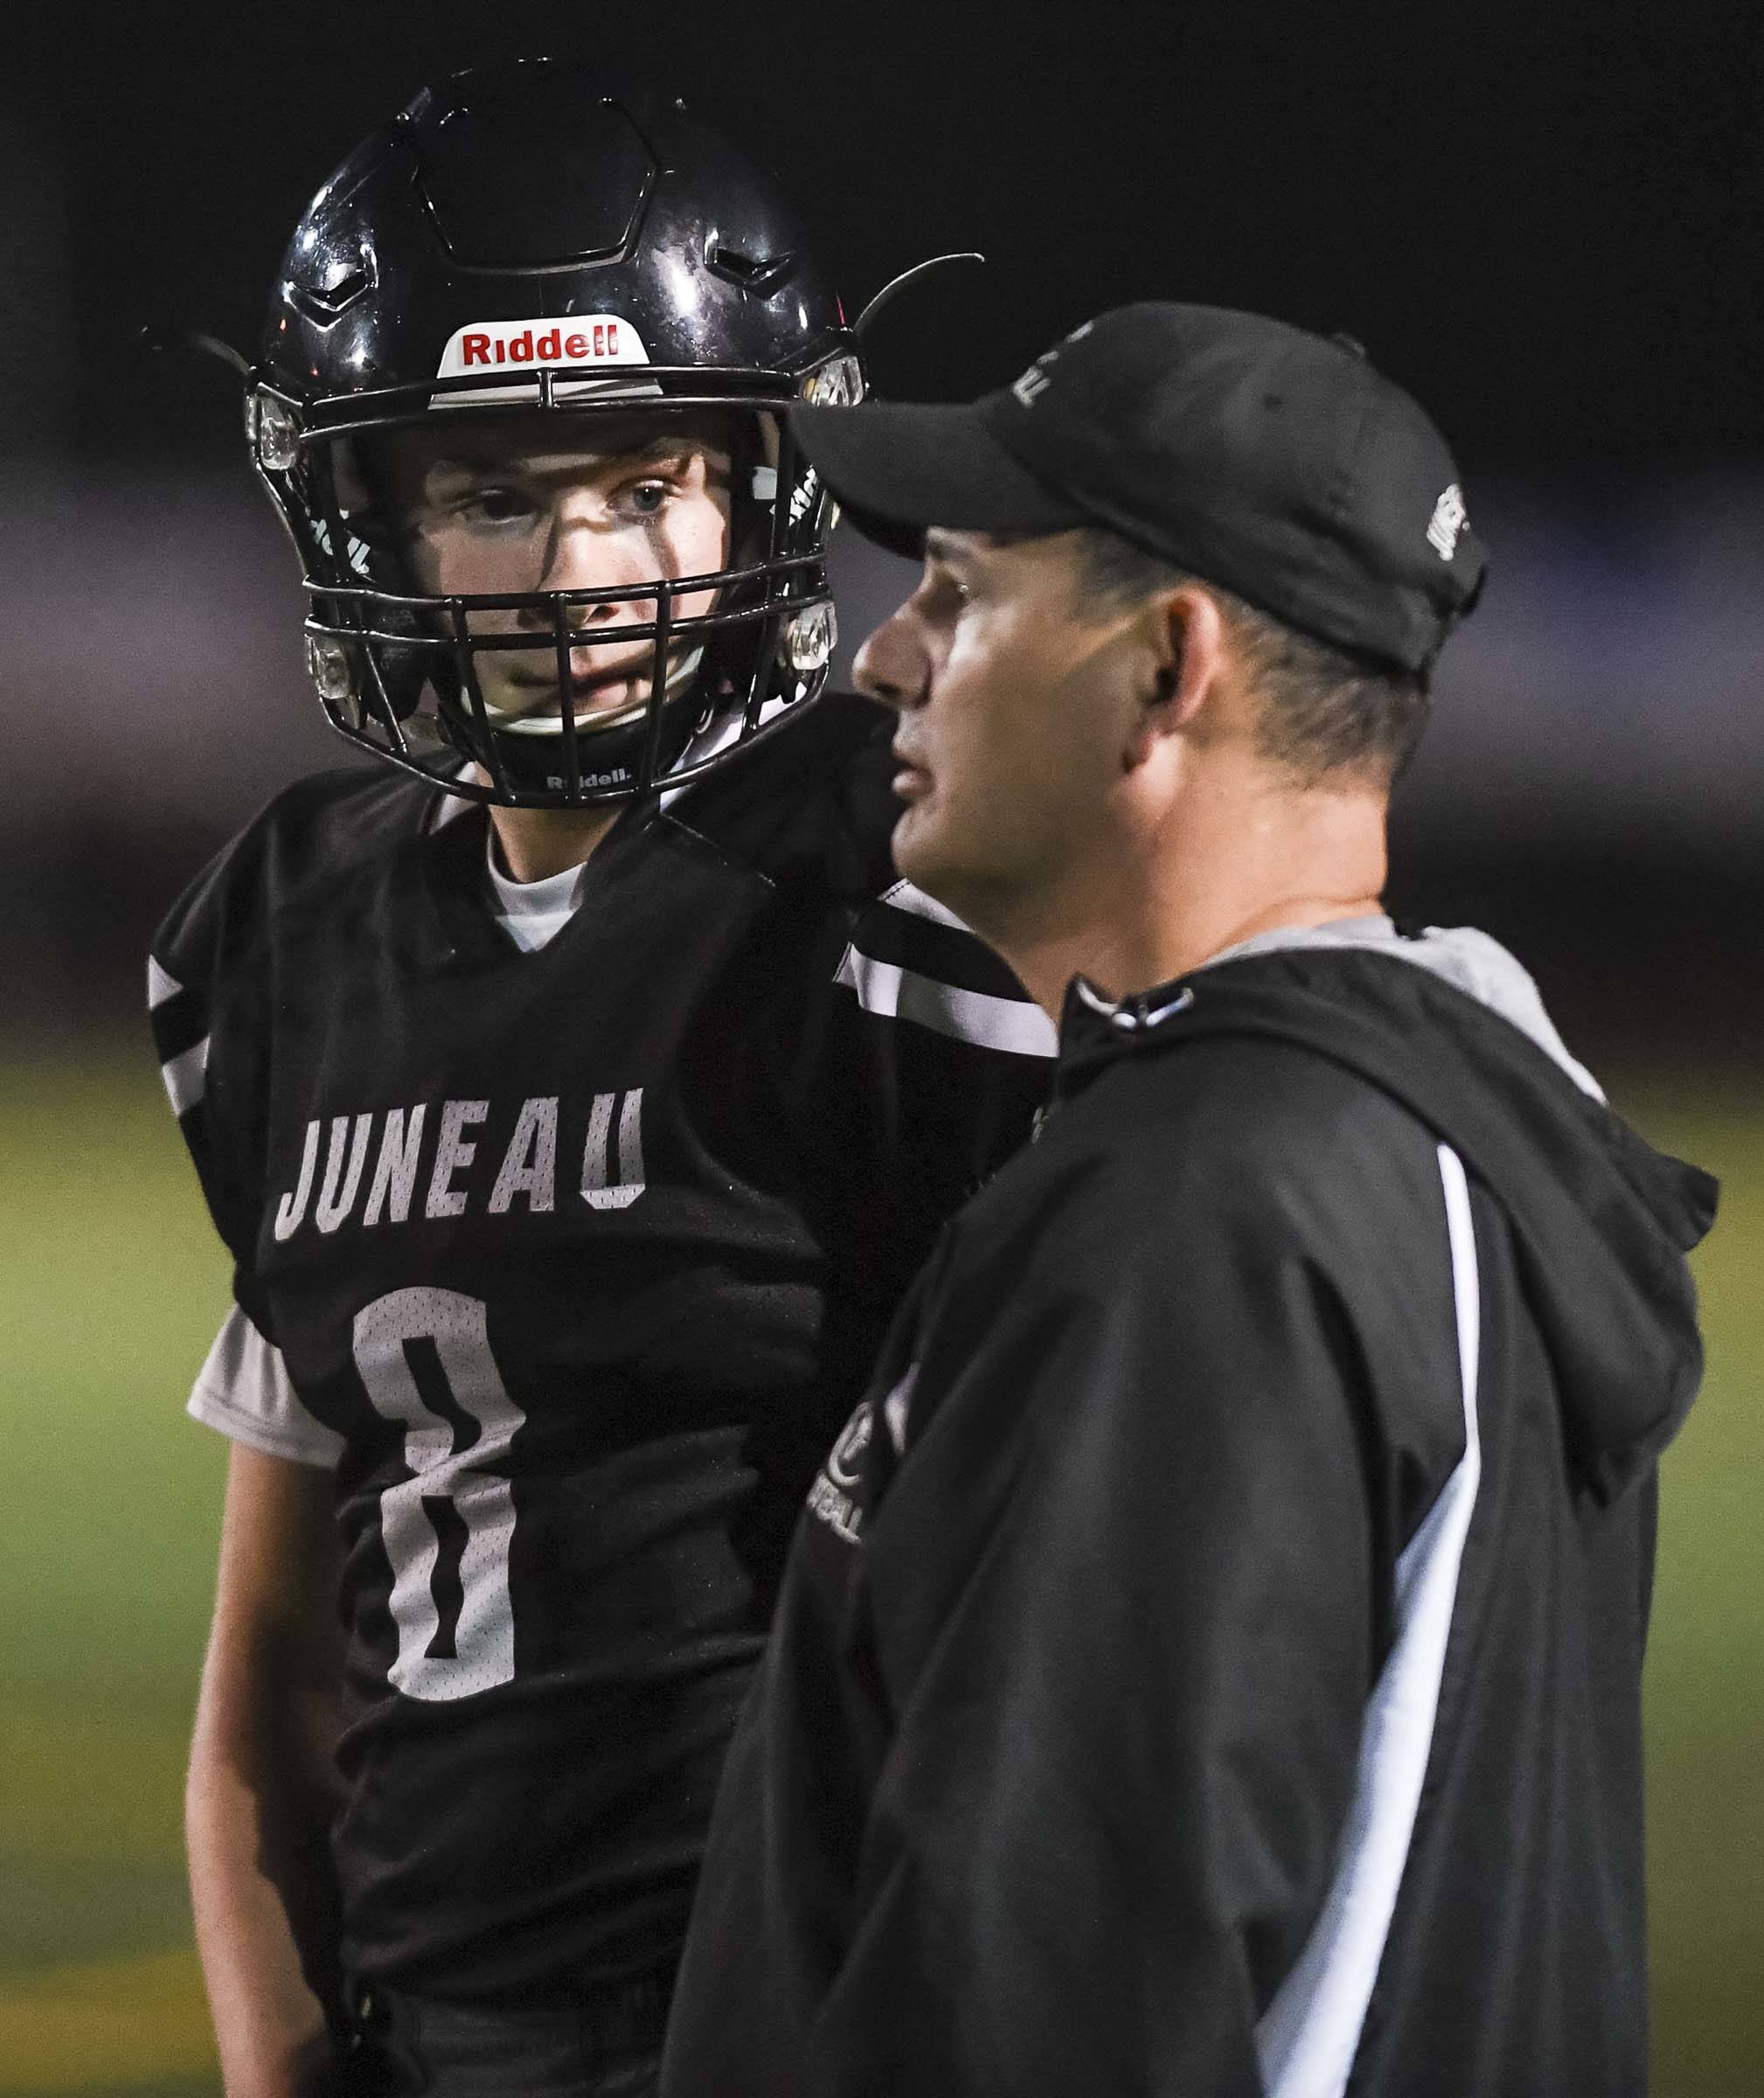 Juneau’s Noah Chambers receives a play by coach Rich Sjoroos as they play against Antelope Union in the third quarter at Adair-Kennedy Memorial Field on Saturday, Aug. 24, 2019. Juneau won 56-18. (Michael Penn | Juneau Empire File)